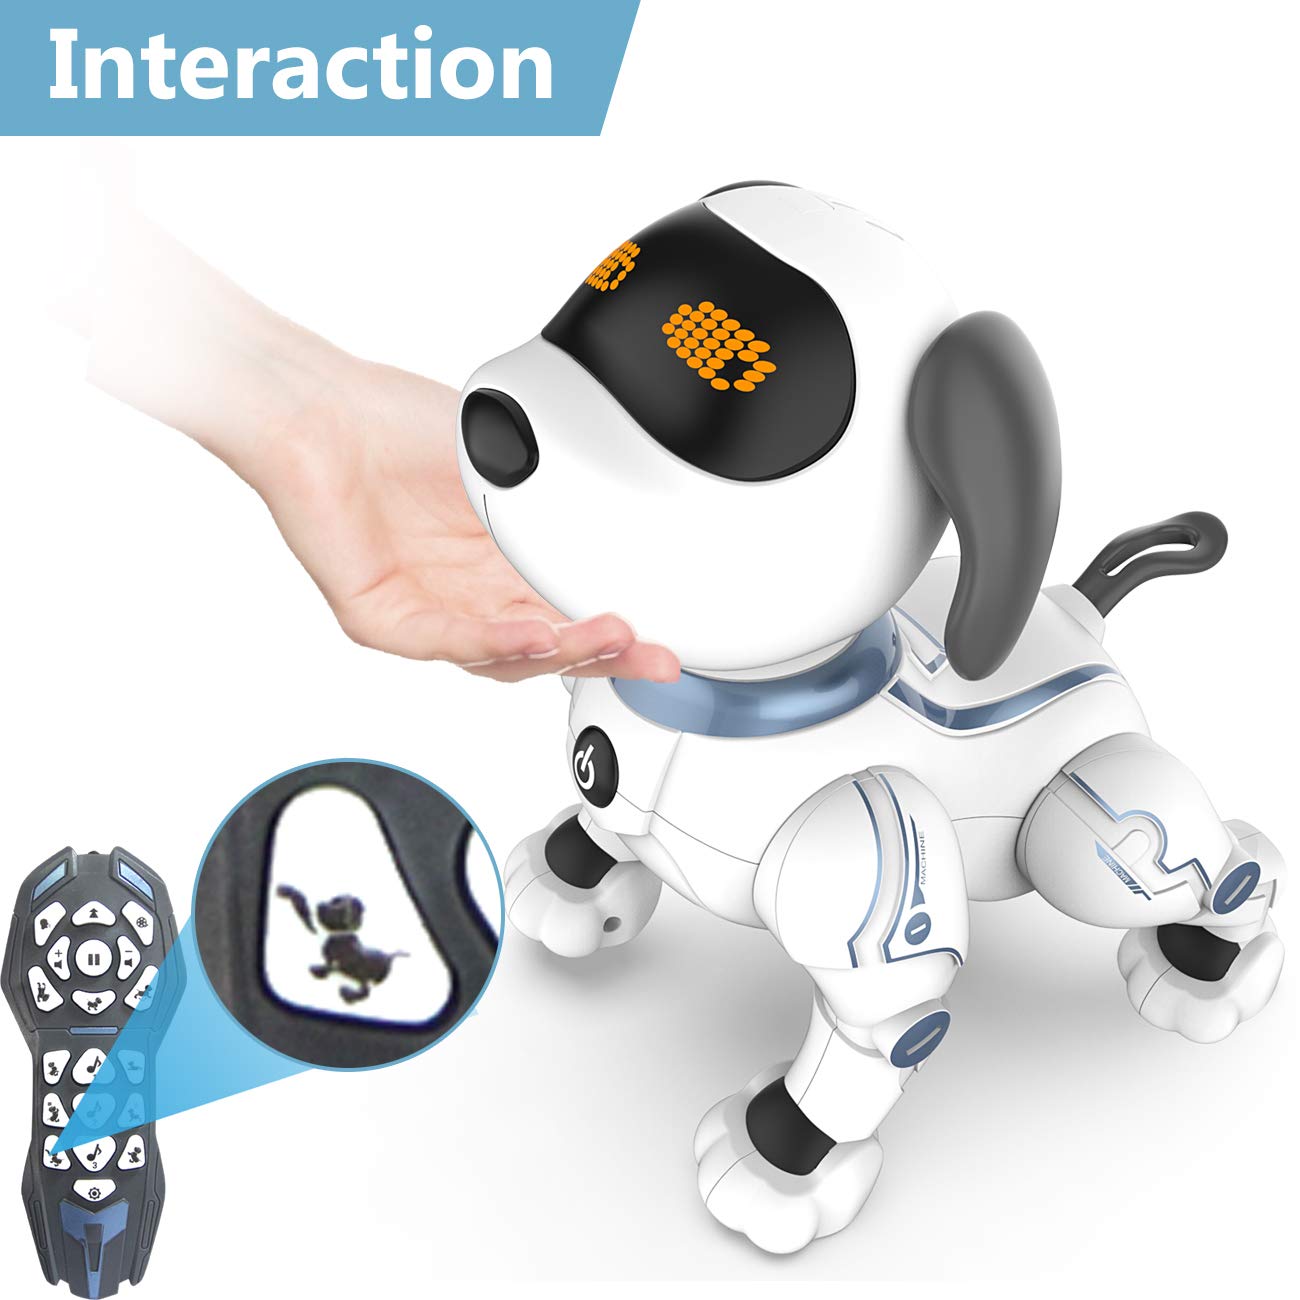 HBUDS Robot Dog Toys for Kids, Remote Control Stunt Programmable Robot Puppy Toy Dog Interactive with Commands Sing, Dance, Bark, Walk Electronic Pet Dog for Boys Girls Gifts (Remote Control)